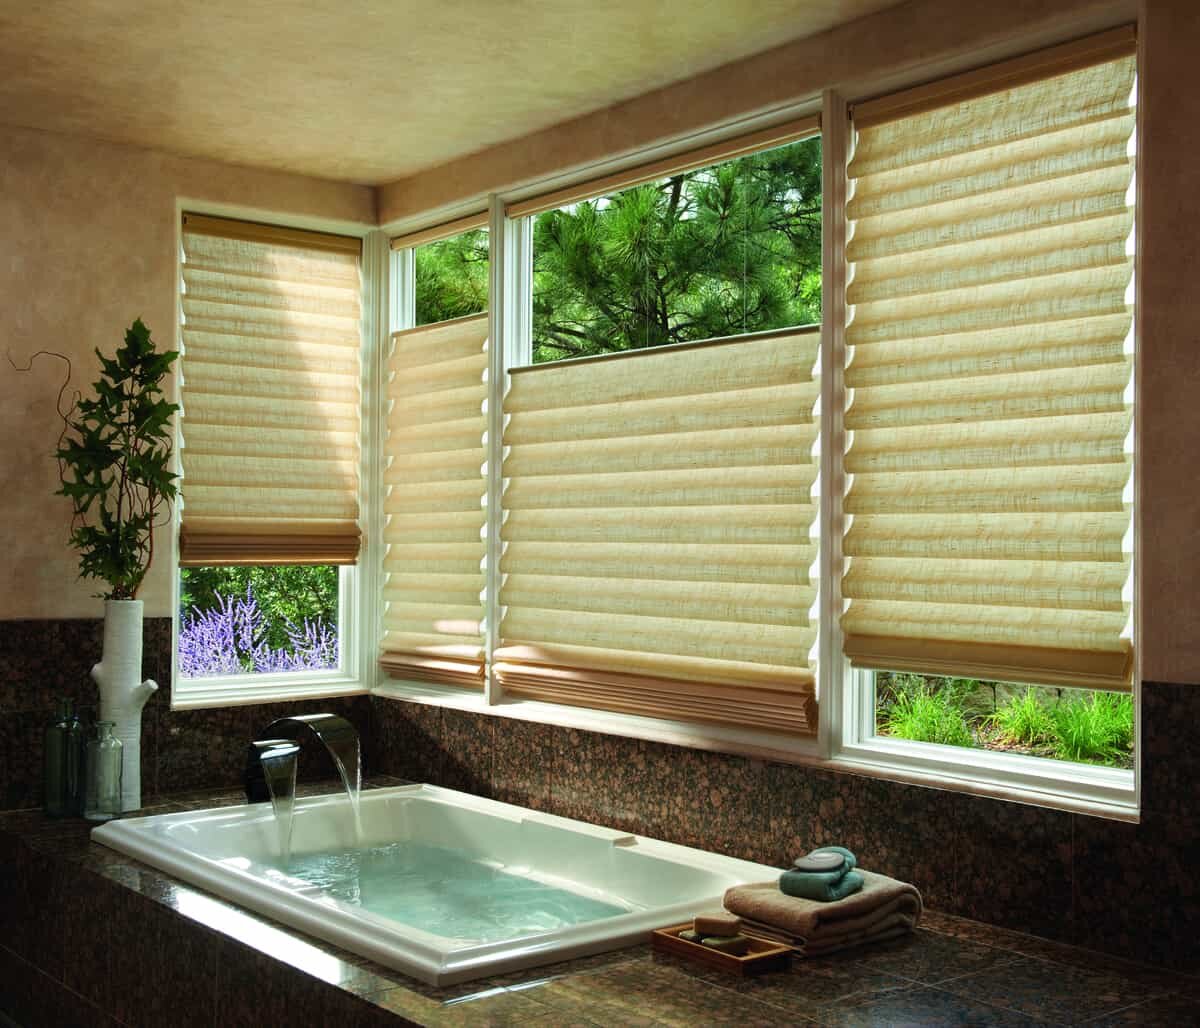 Vignette® Roman Shades near Killeen, Texas (TX) and other roman shades from Graber and Norman®